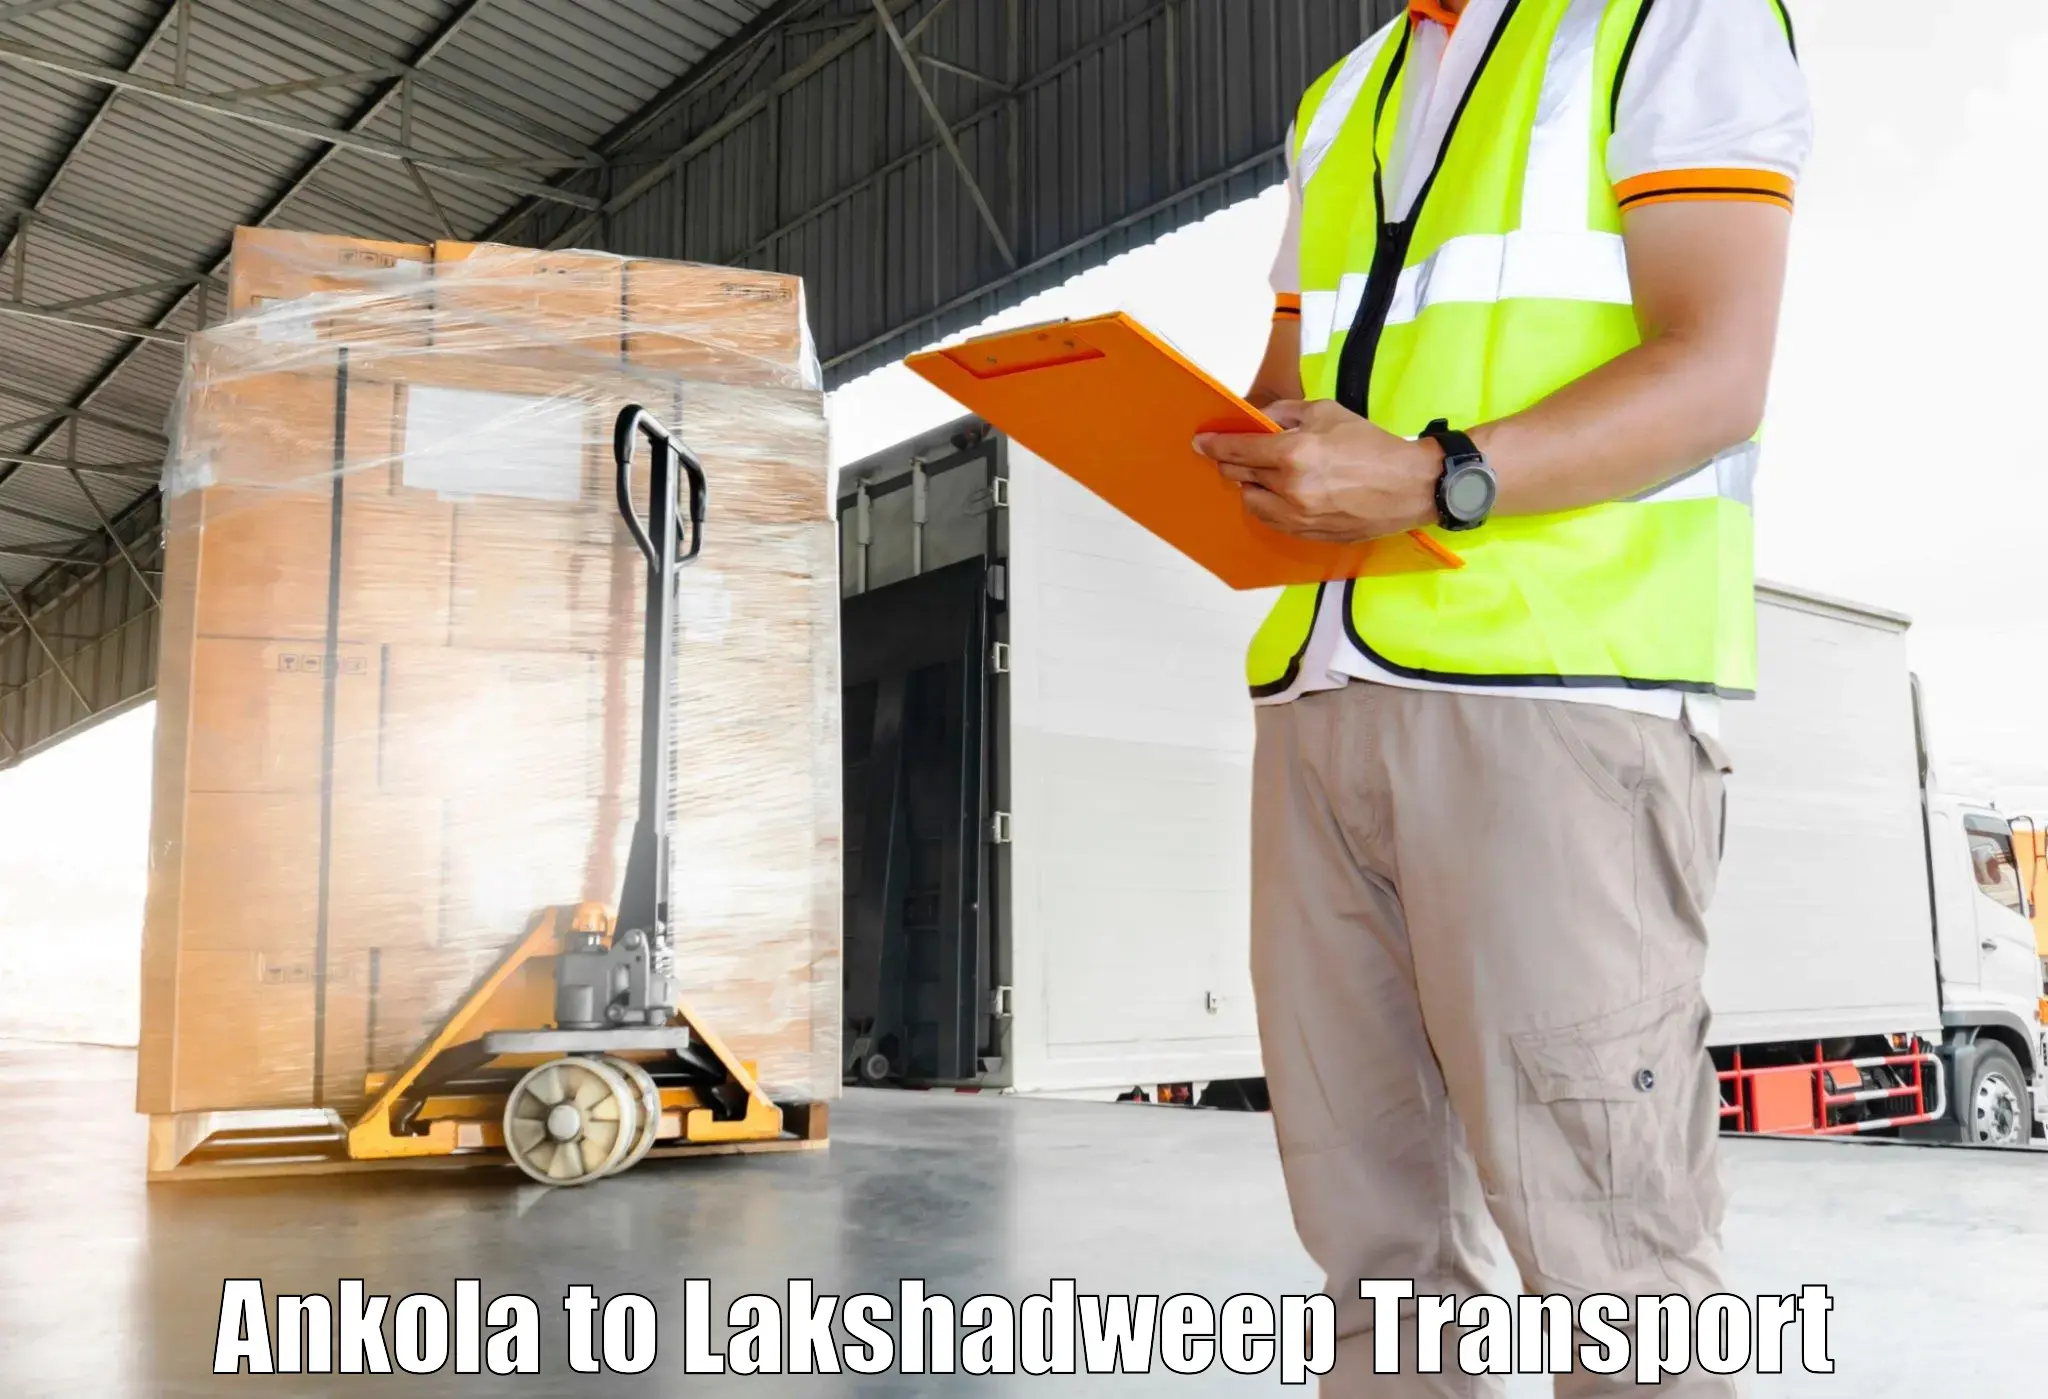 Container transport service Ankola to Lakshadweep